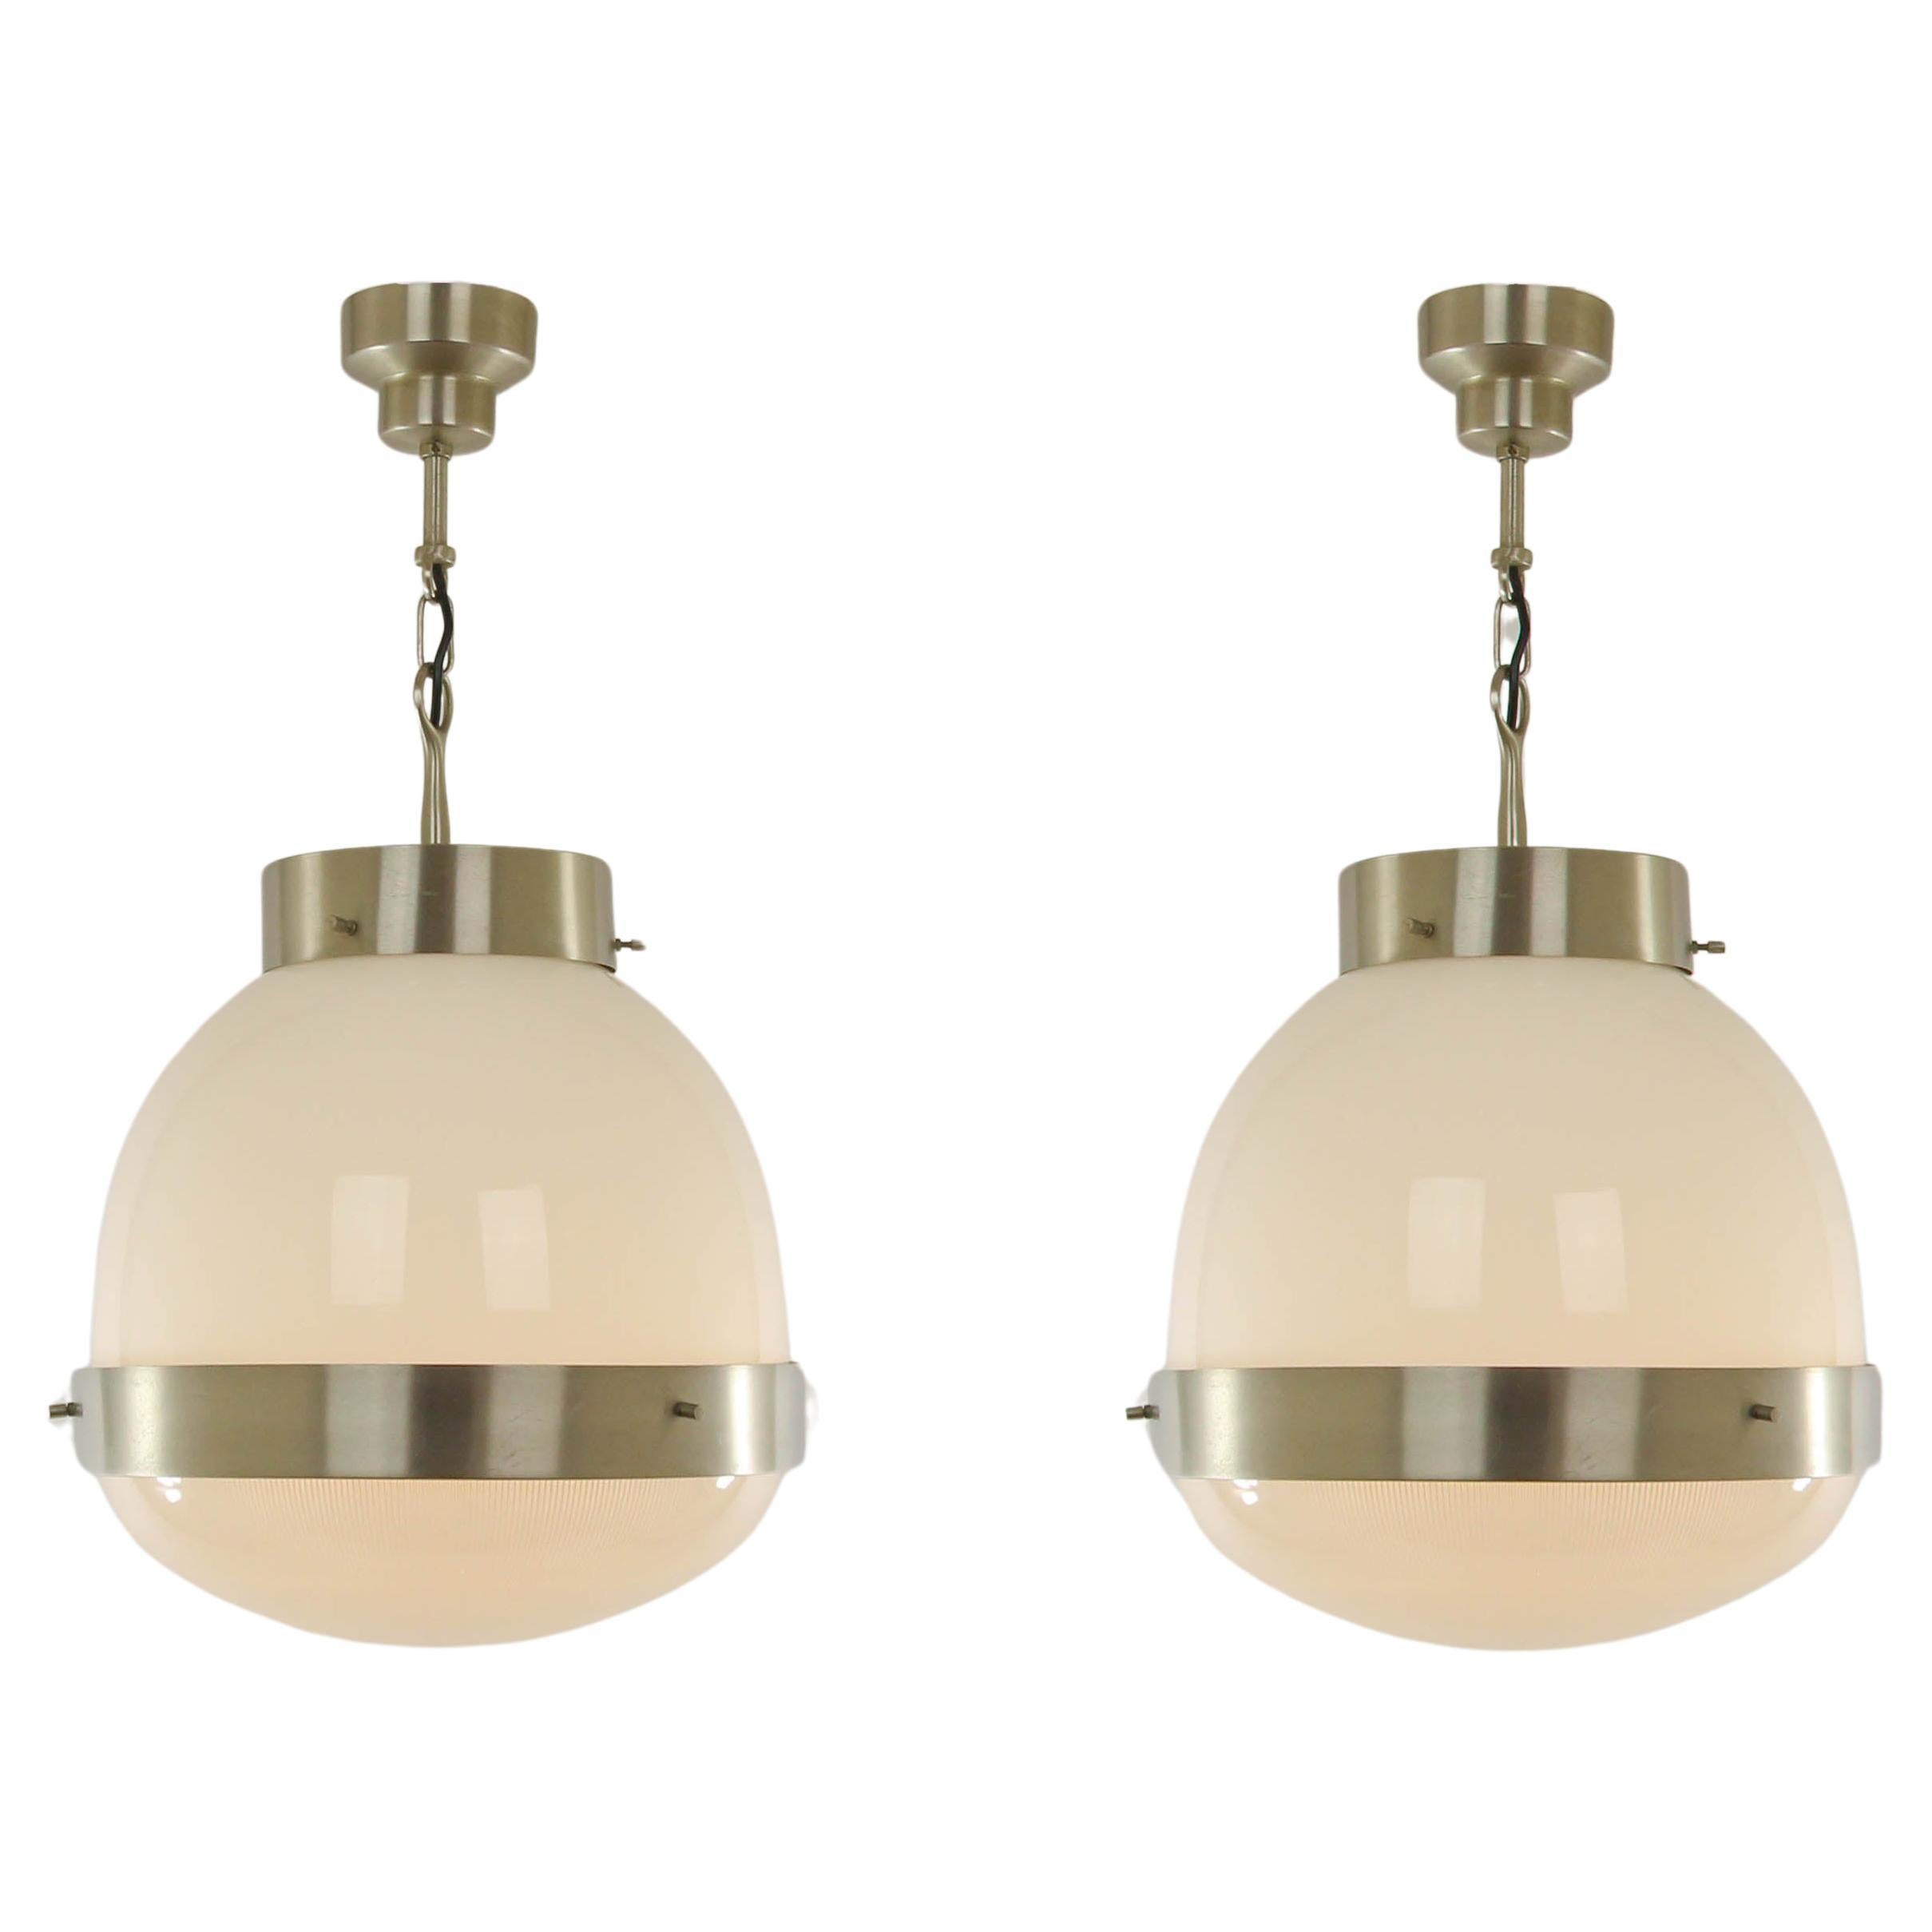 Pair of Delta Pendants by Sergio Mazza for Artemide, 1960s For Sale